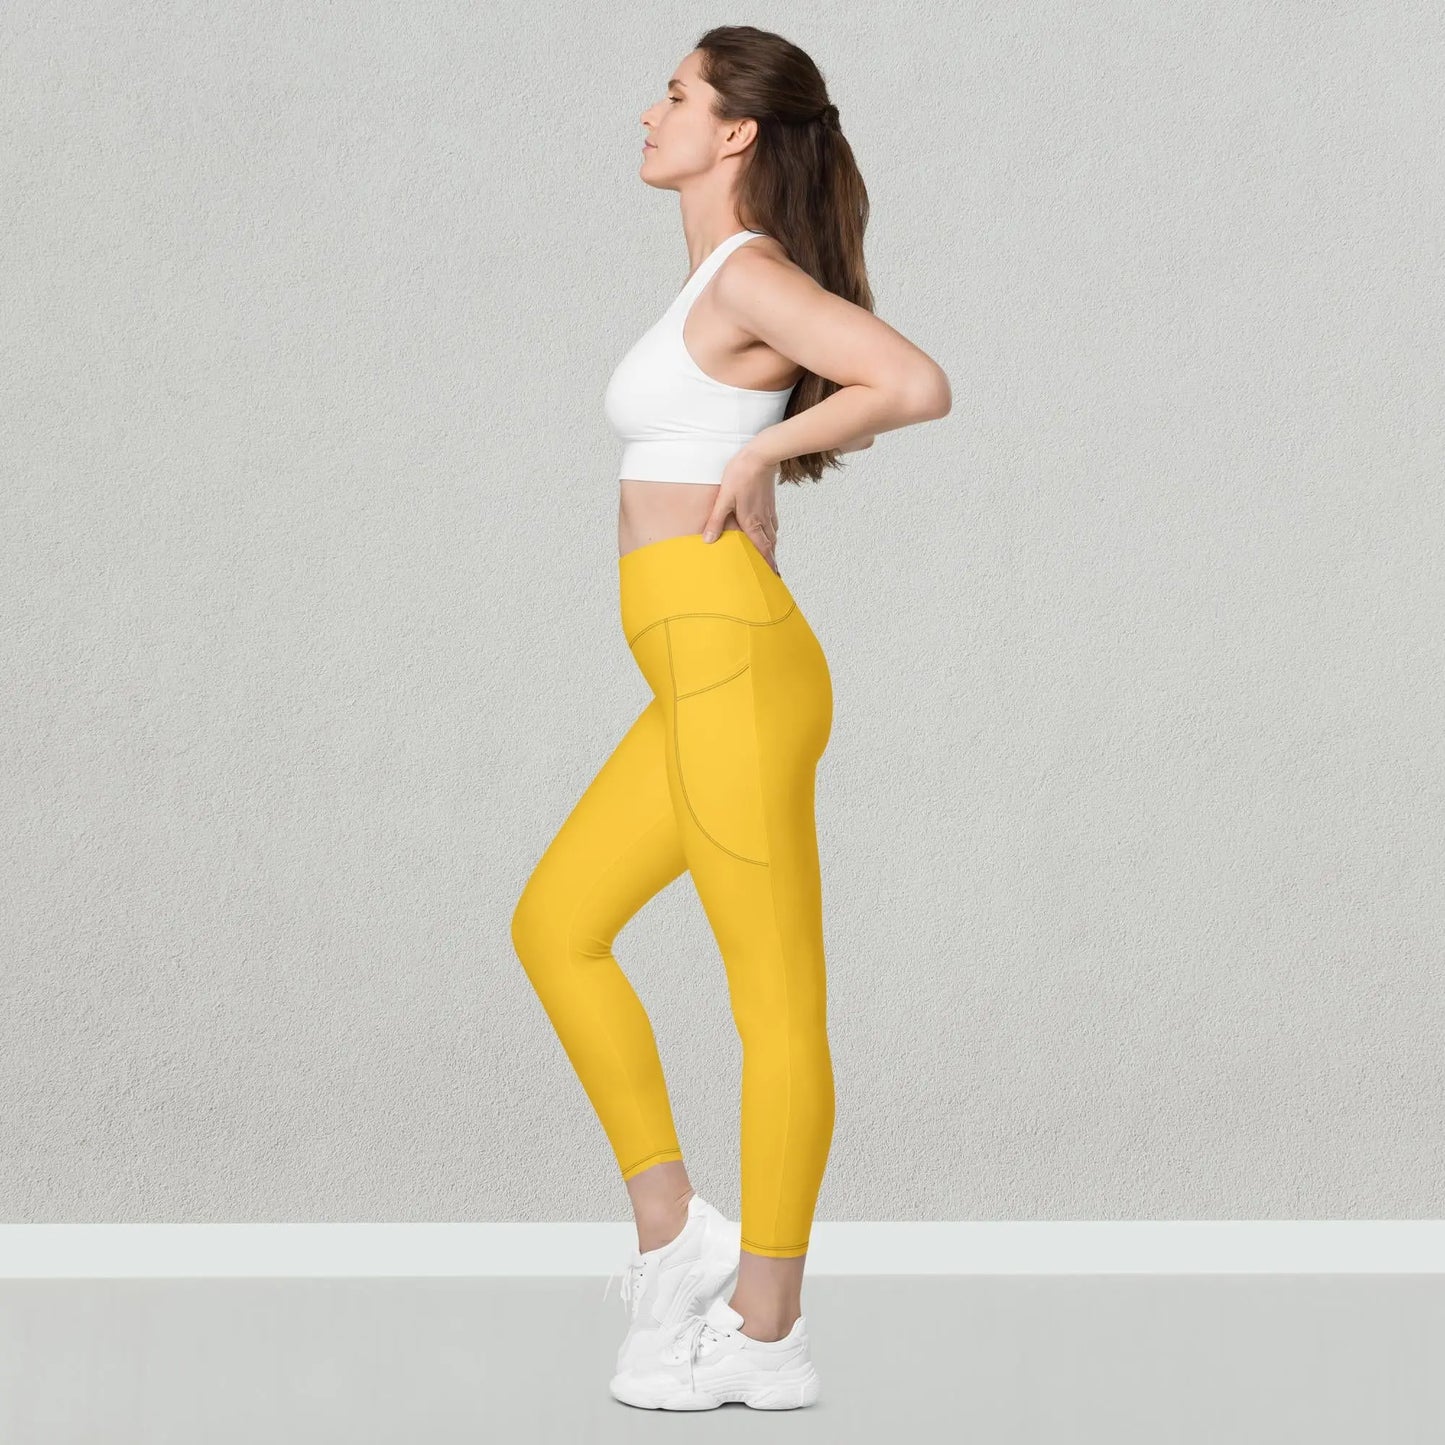 Yellow Leggings with pockets - Image #1